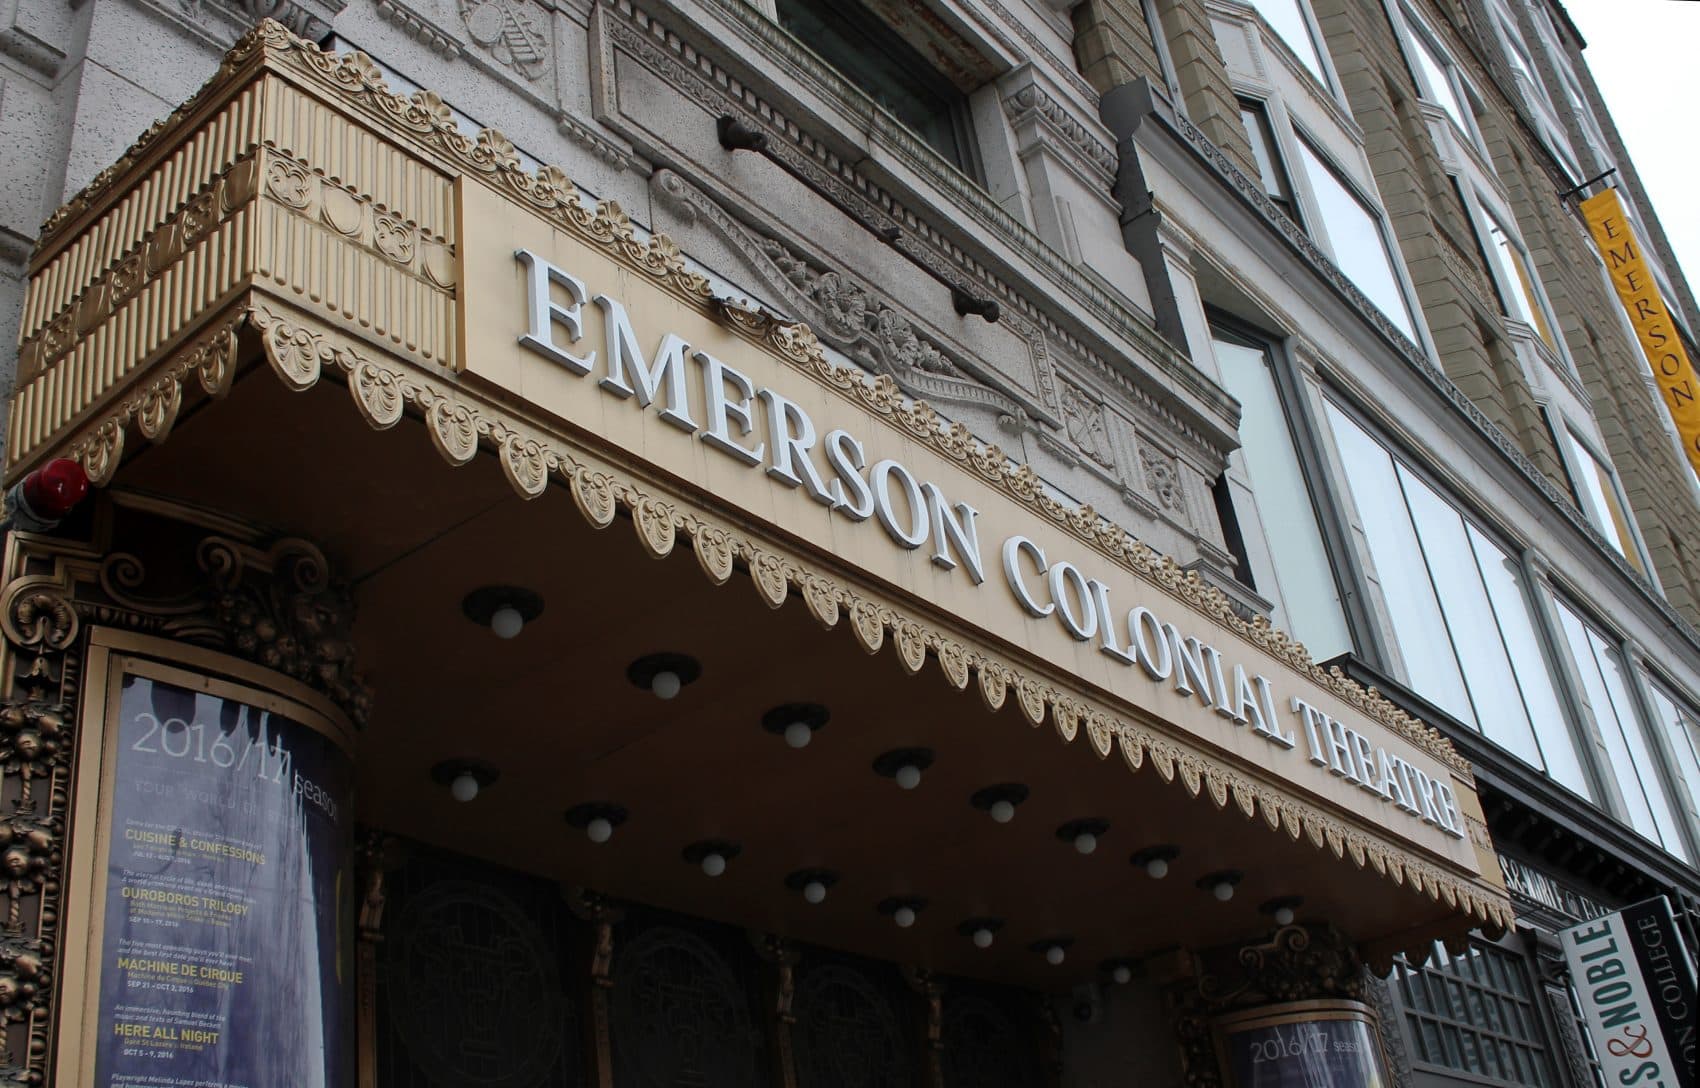 The 1,700 seat Colonial Theatre, owned by Emerson College, shut its doors in 2015. (Amy Gorel/WBUR)